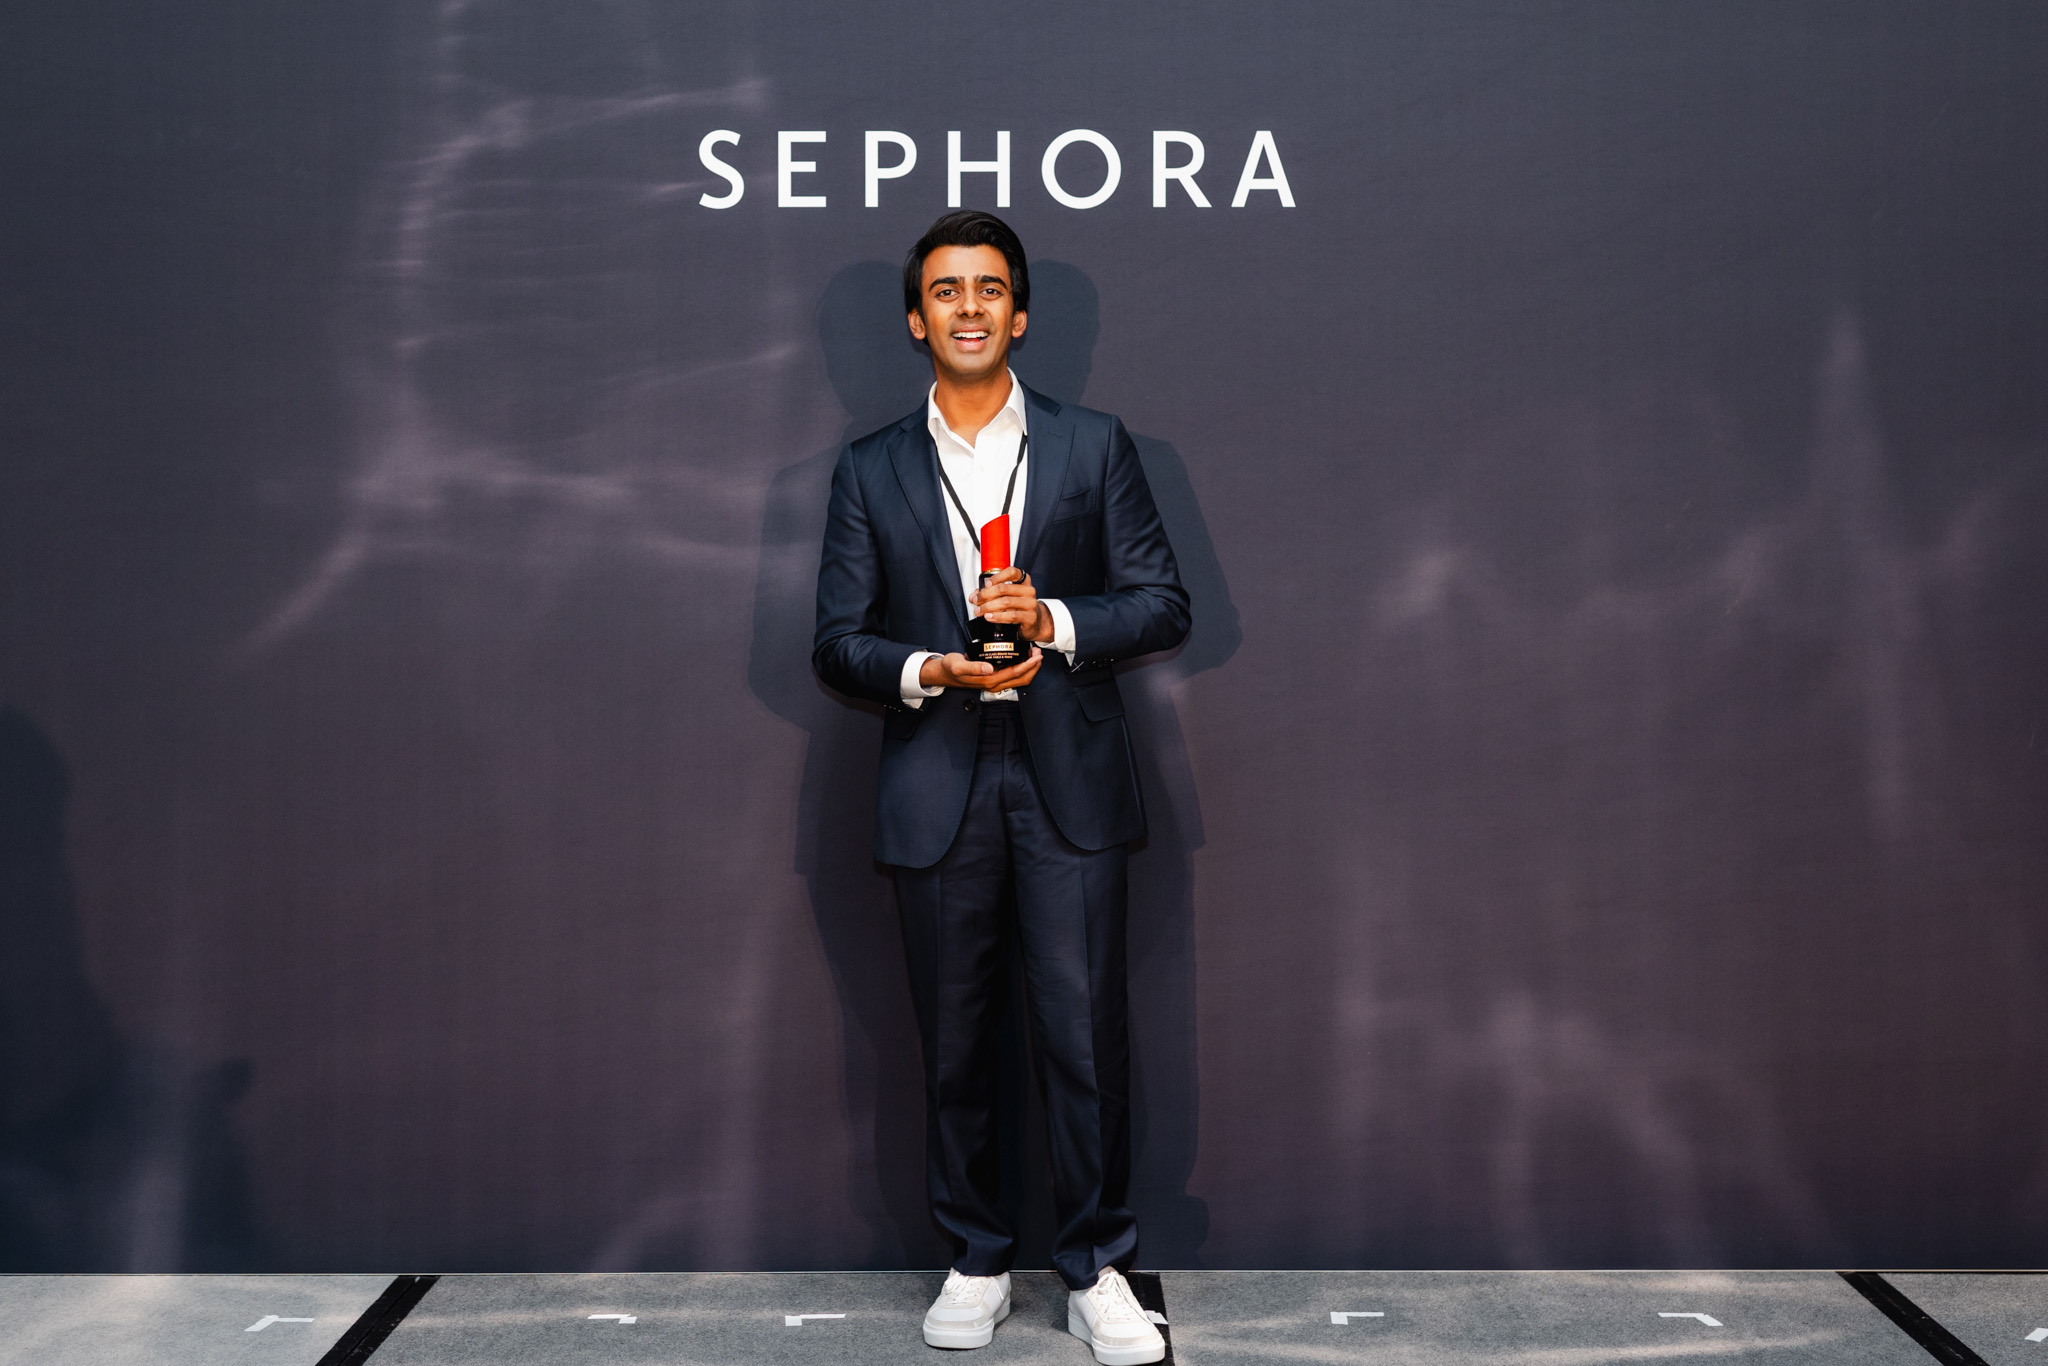 A man in a dark suit holding an award stands in front of a Sephora backdrop, exemplifying top-notch corporate photography.